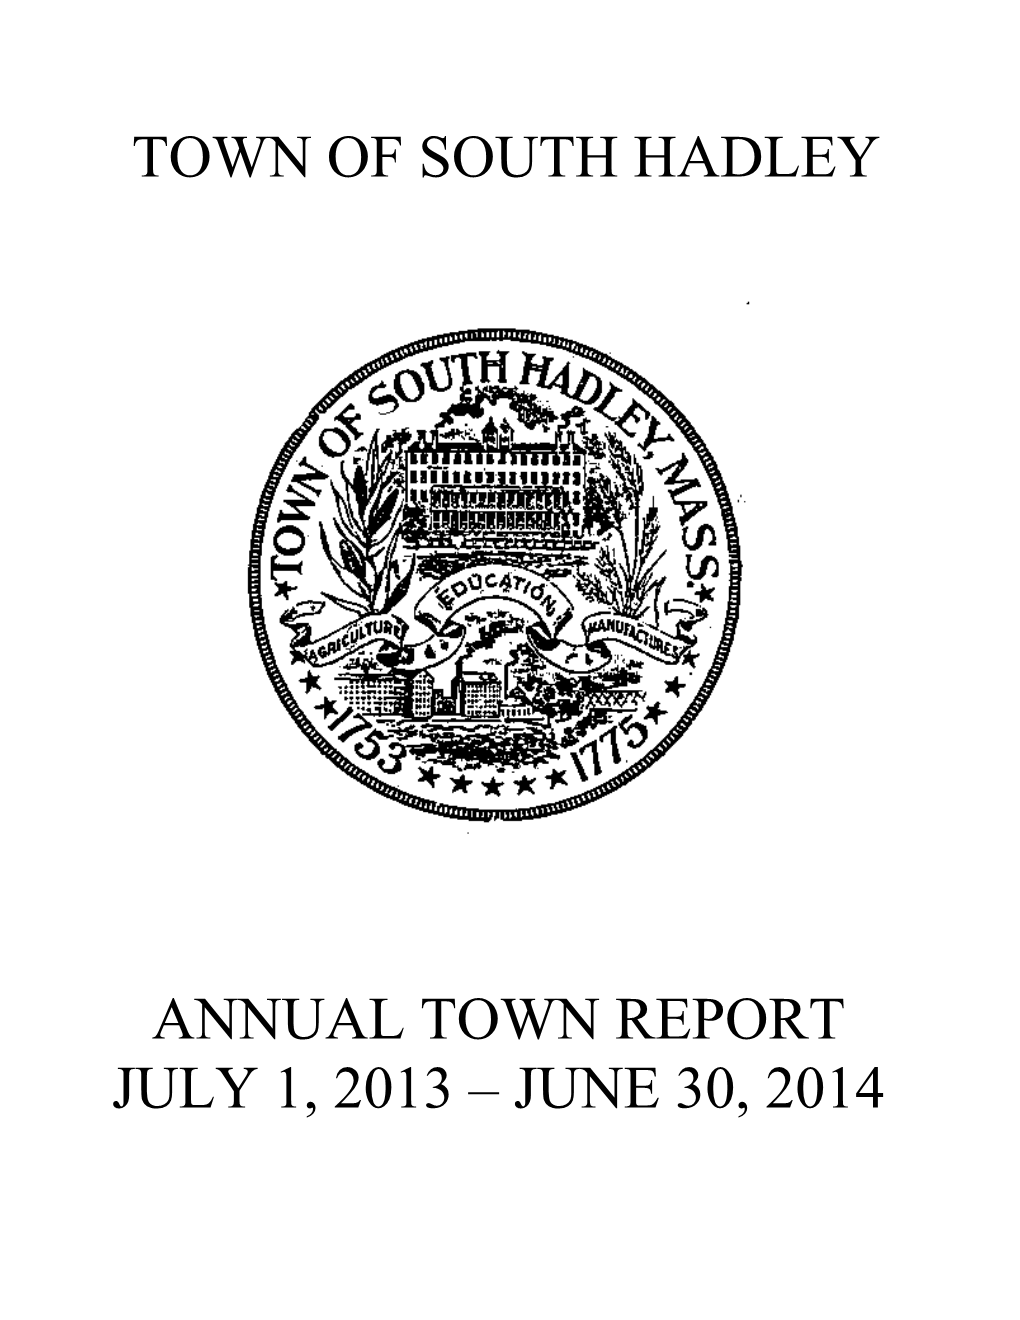 Town of South Hadley Annual Town Report July 1, 2013 – June 30, 2014